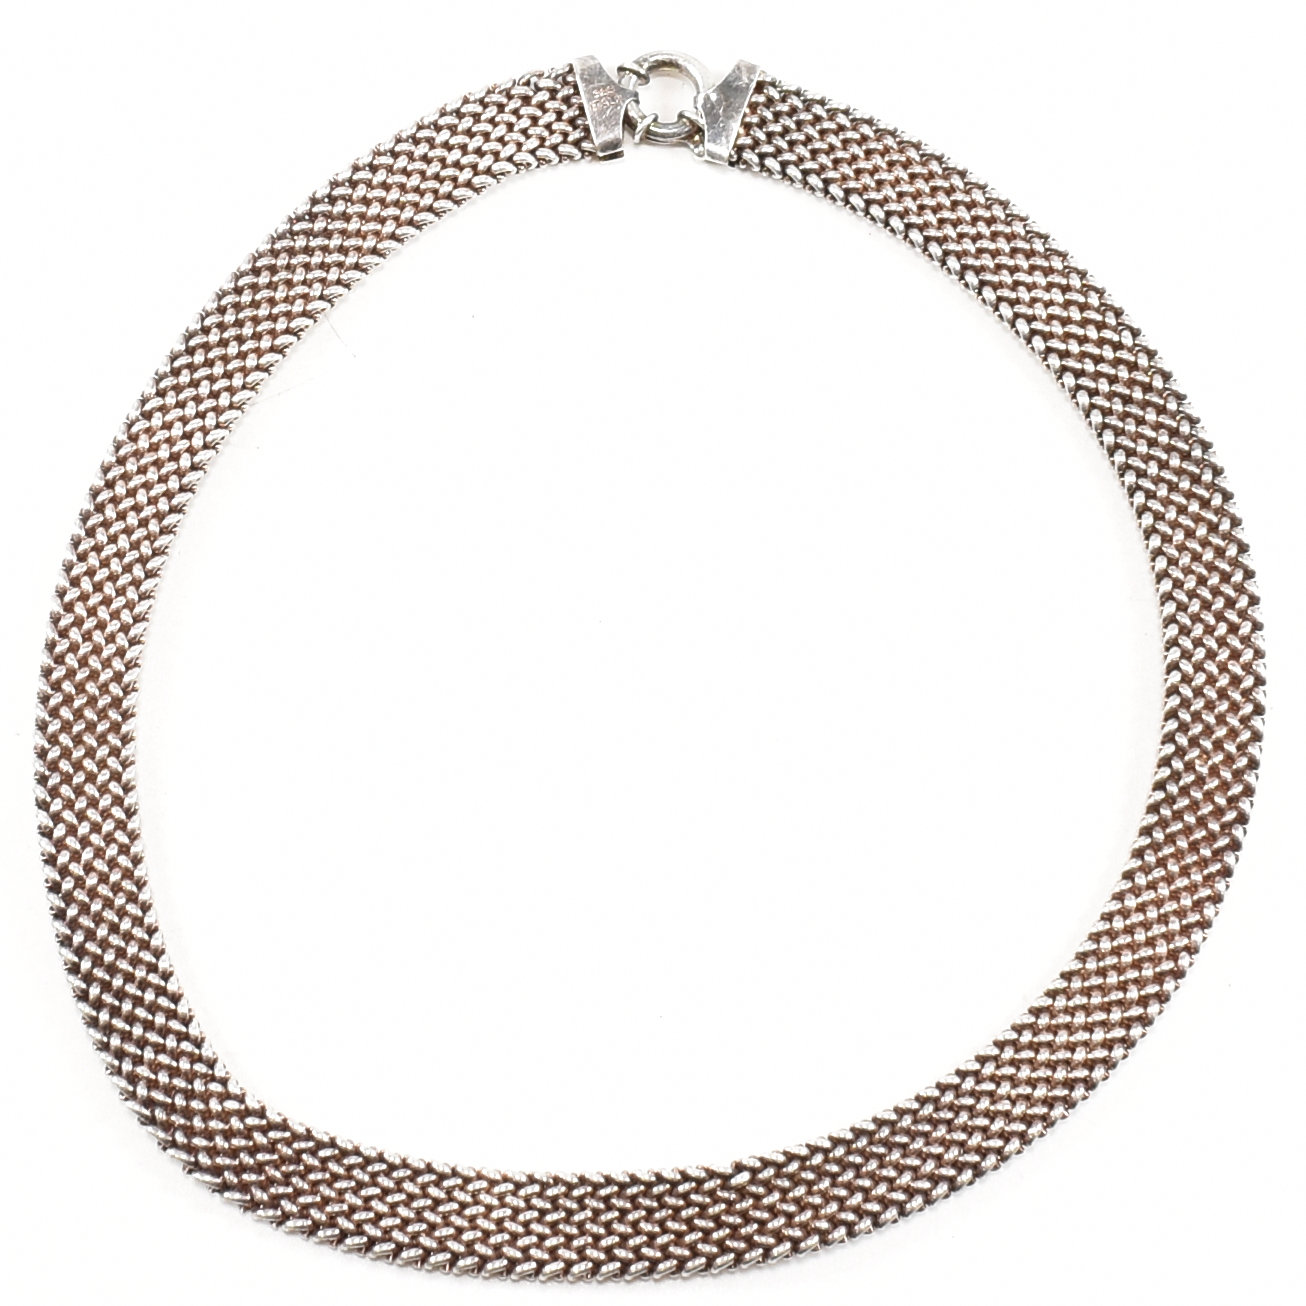 ITALIAN 925 SILVER MESH CHAIN NECKLACE - Image 2 of 4